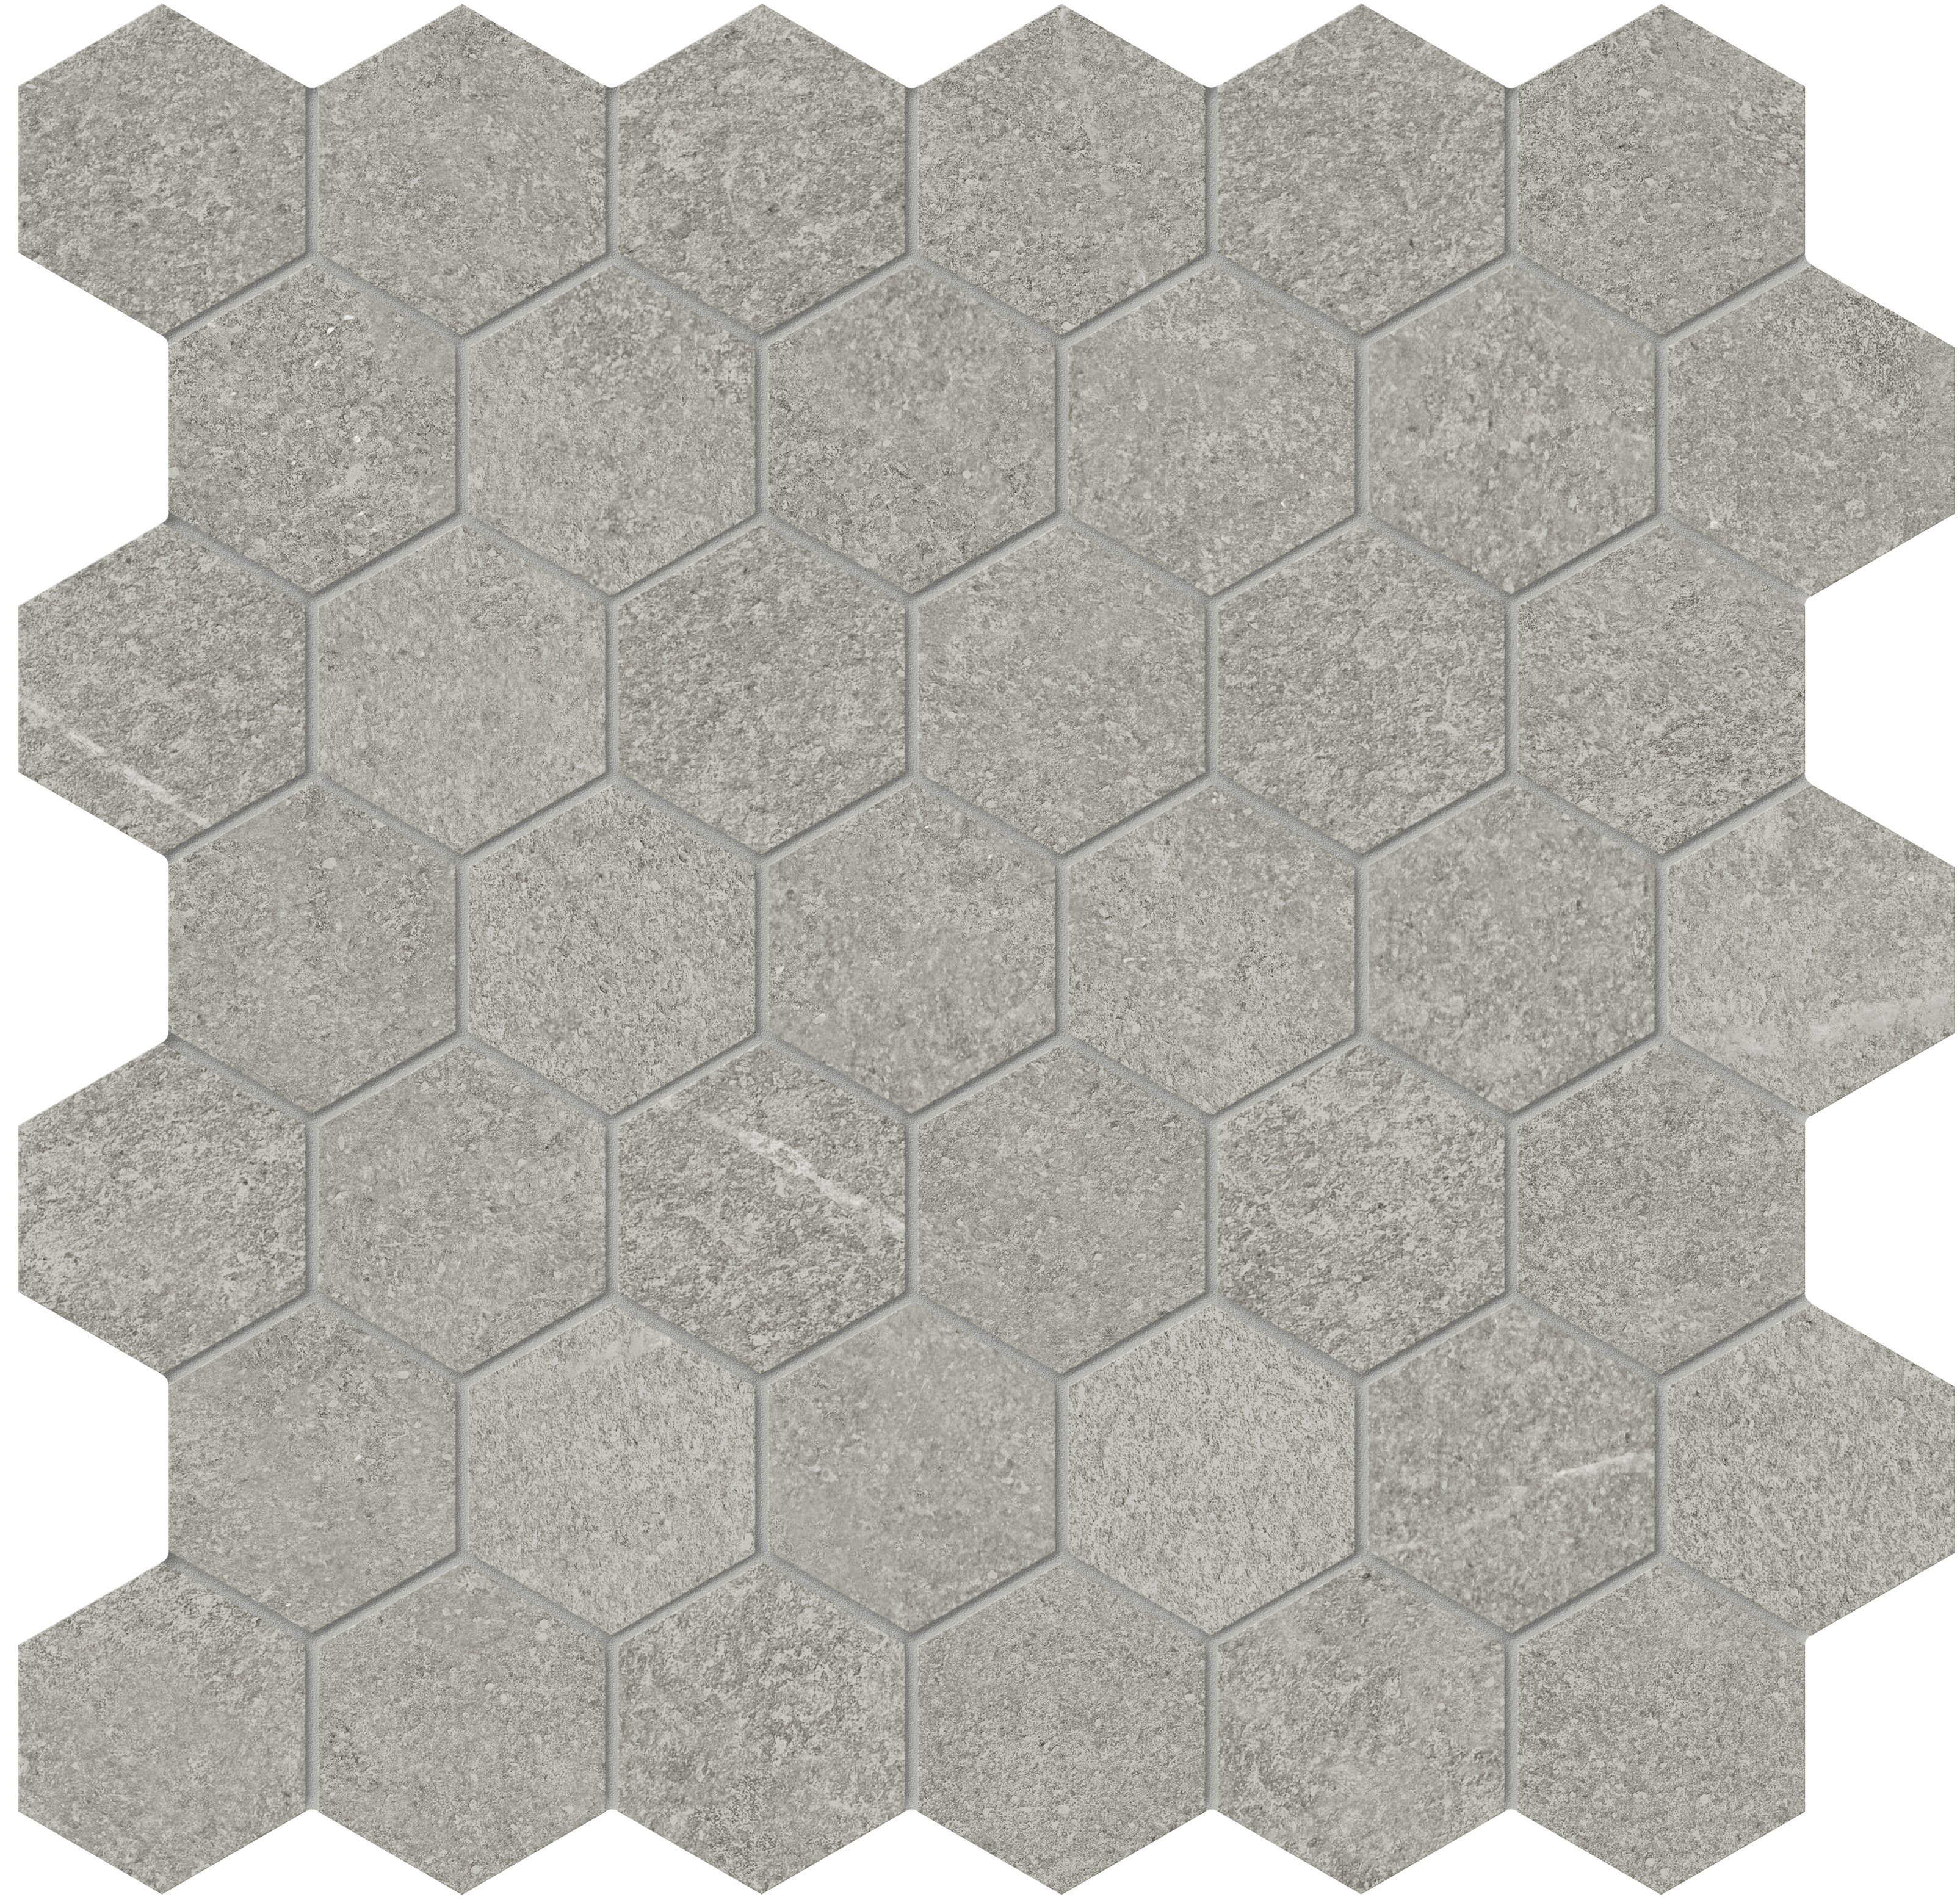 clay hexagon 2-inch pattern color body porcelain mosaic from mjork anatolia collection distributed by surface group international matte finish straight edge edge mesh shape